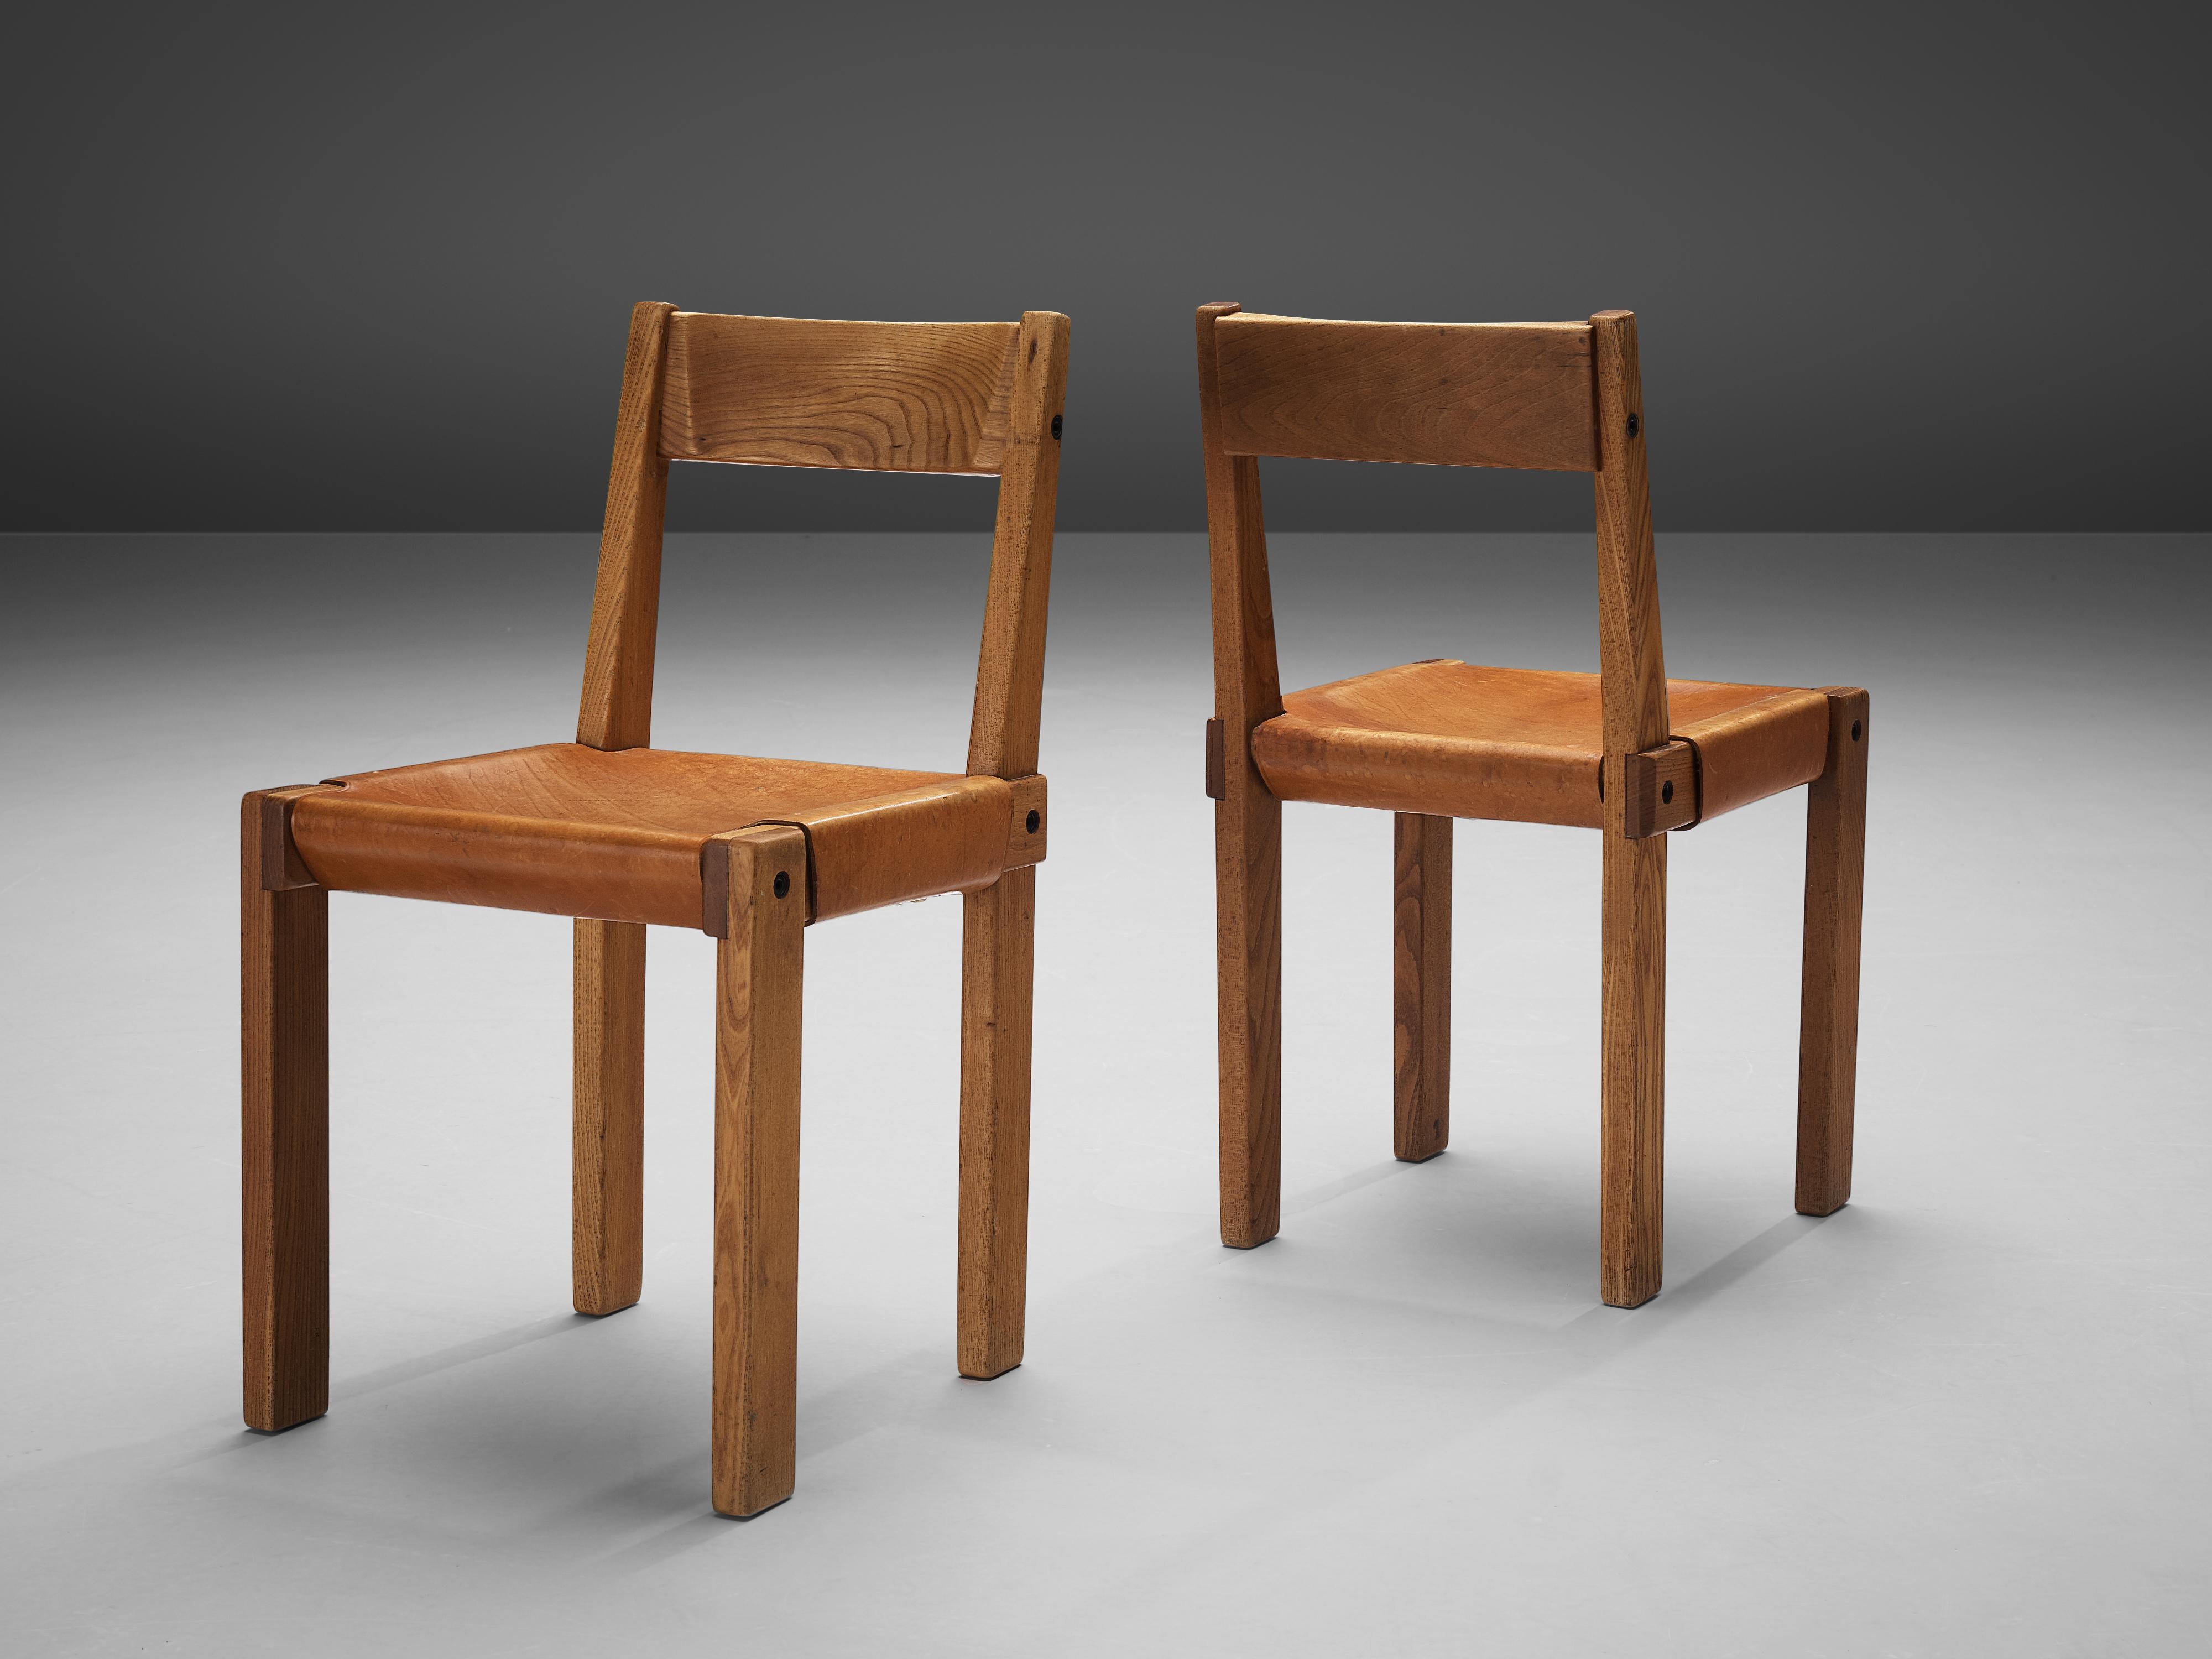 Pierre Chapo, dining chairs model S24, elm, leather, France, circa 1966

Dining chairs in solid elmwood with saddle leather seating and back designed by French designer Pierre Chapo. These chairs have a cubic design of solid elmwood with dark